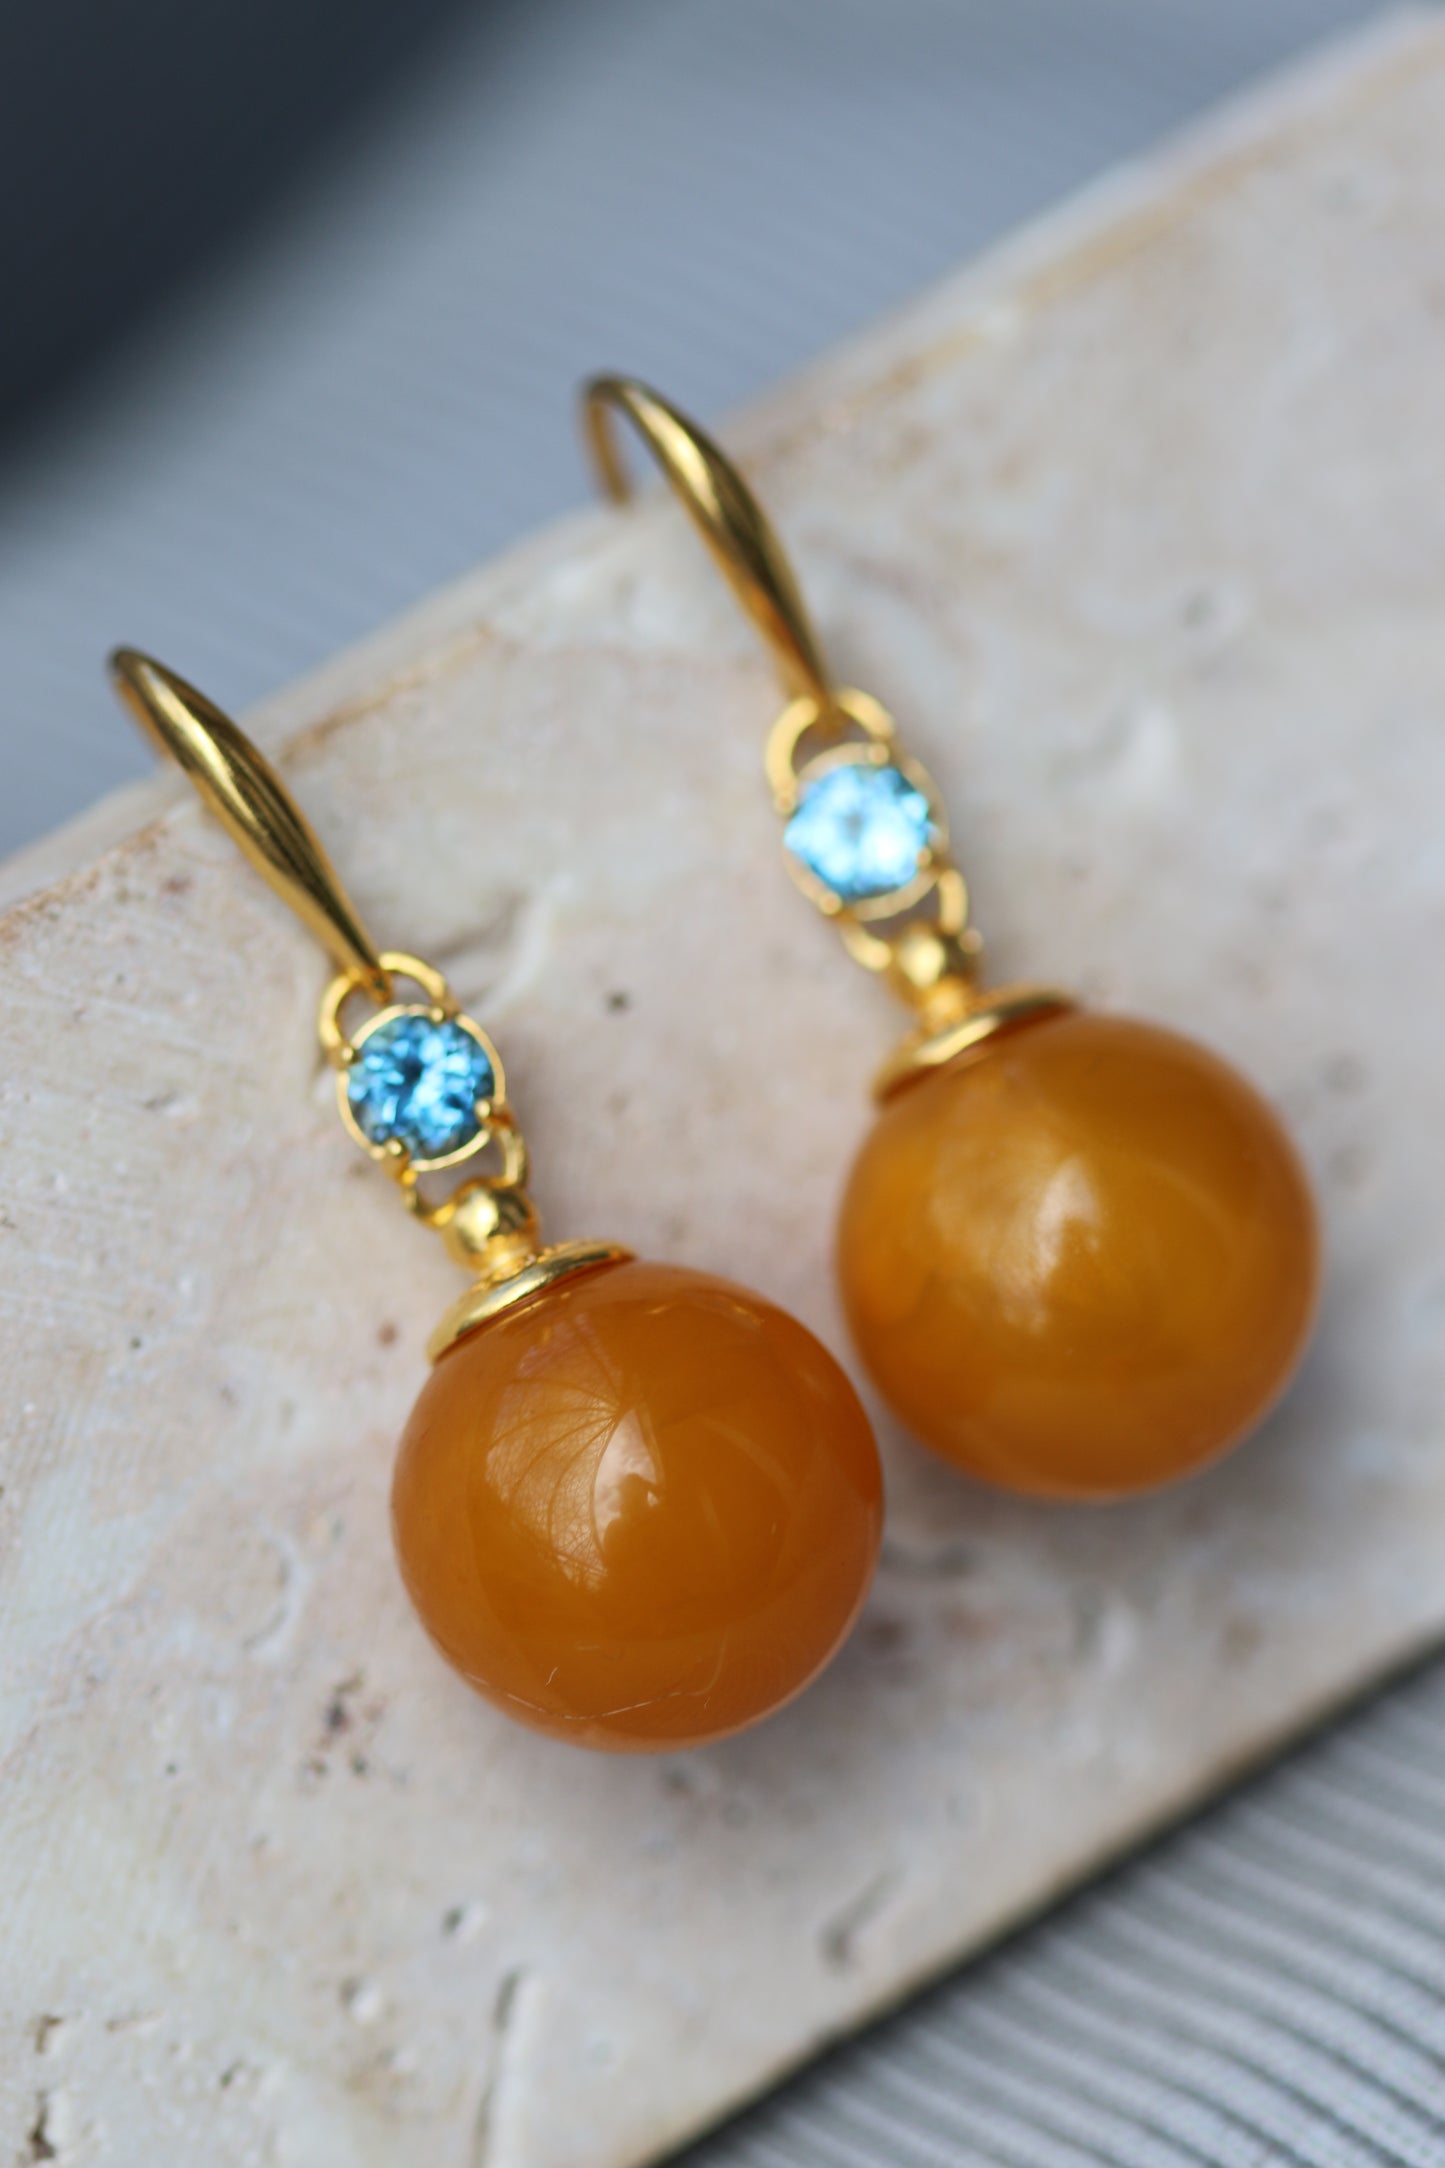 Big Round Old German Dangling Earrings with Faceted Blue Topaz and Gold Plated Silver